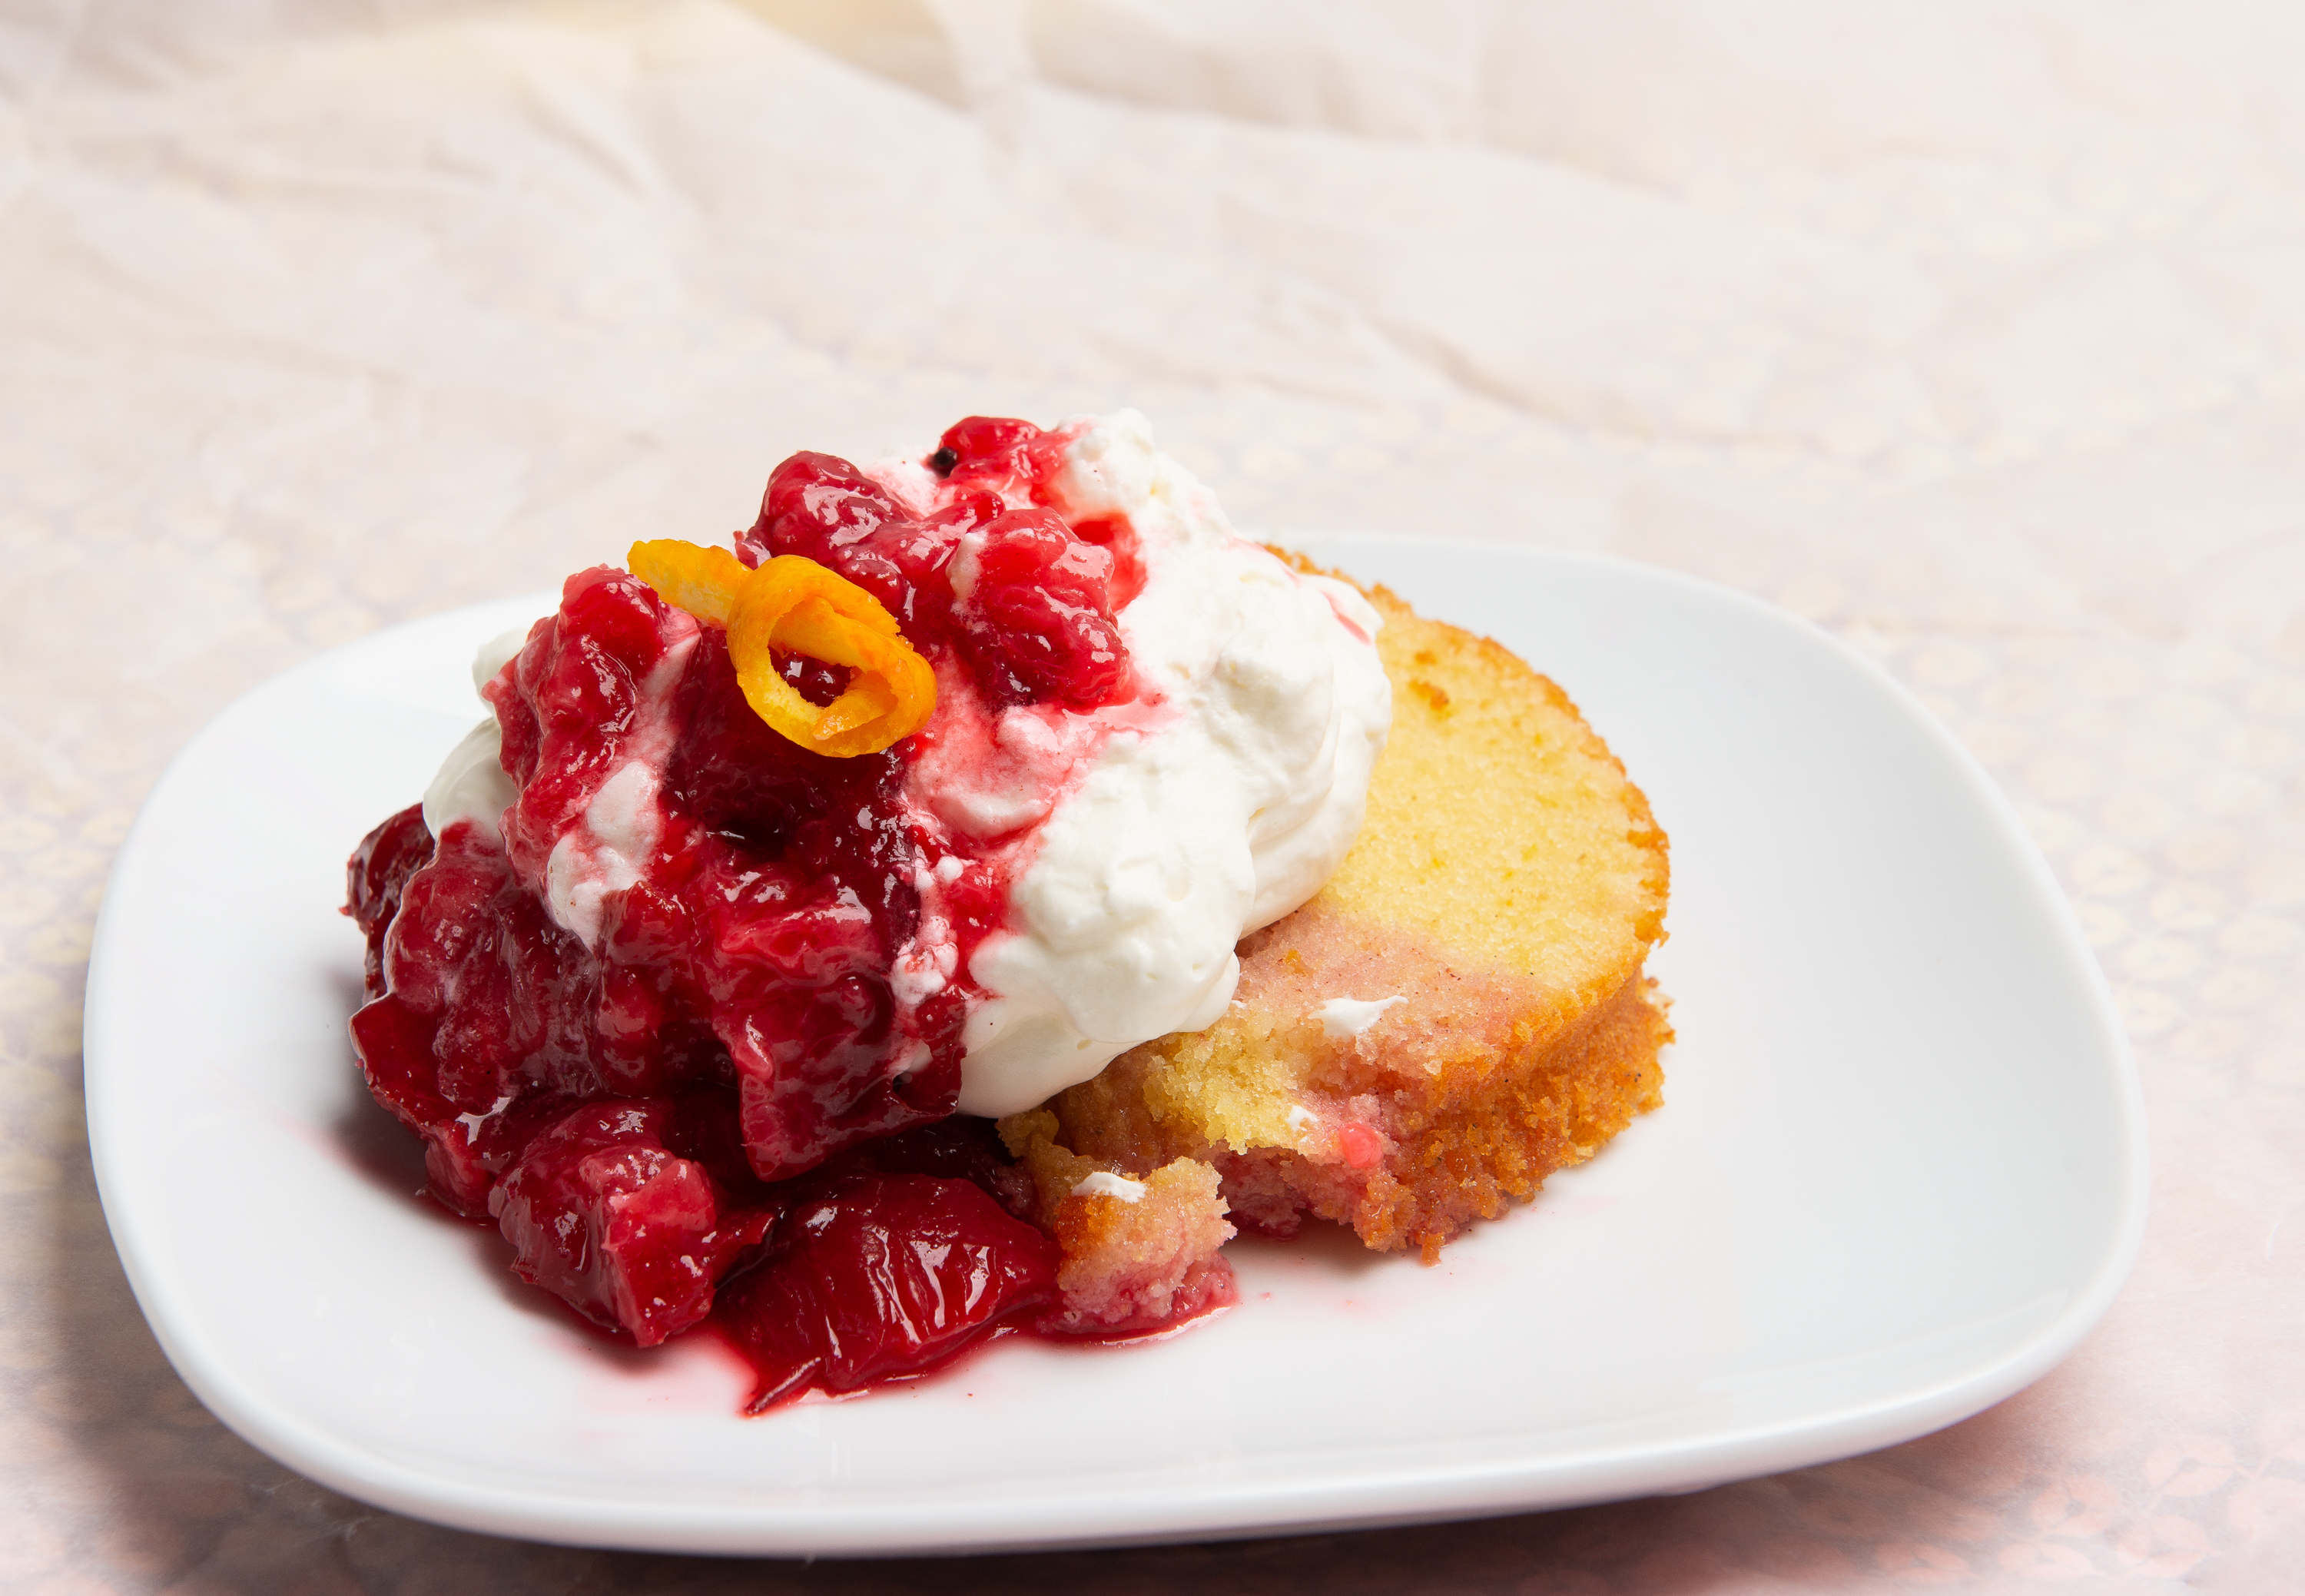 Good Enough For Your VIPs: Almond Butter Cake with Cardamom and Baked Plums